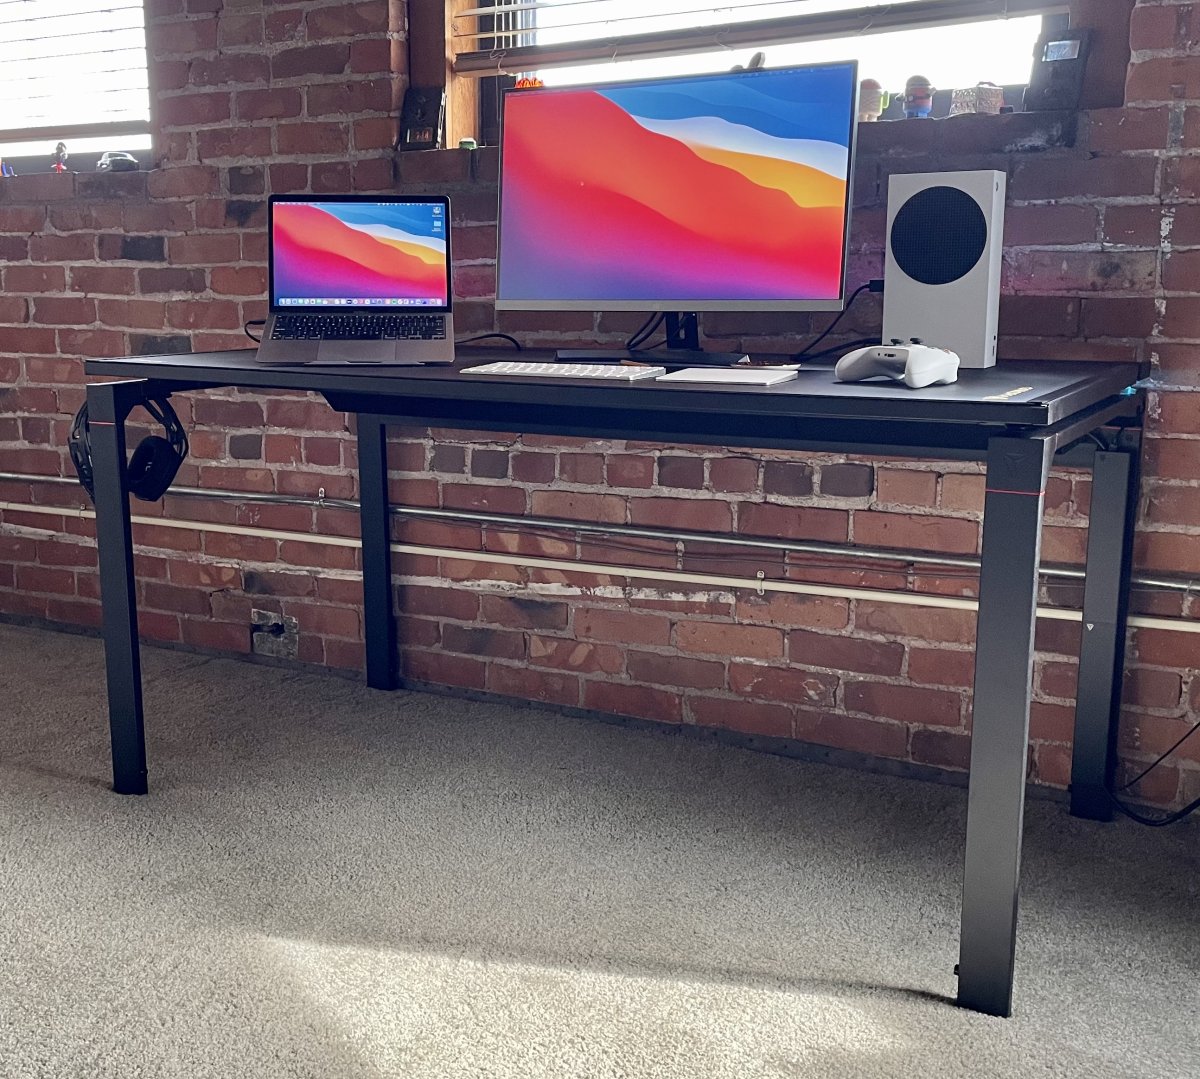 Secretlab's first PC desk is the ultimate cable management